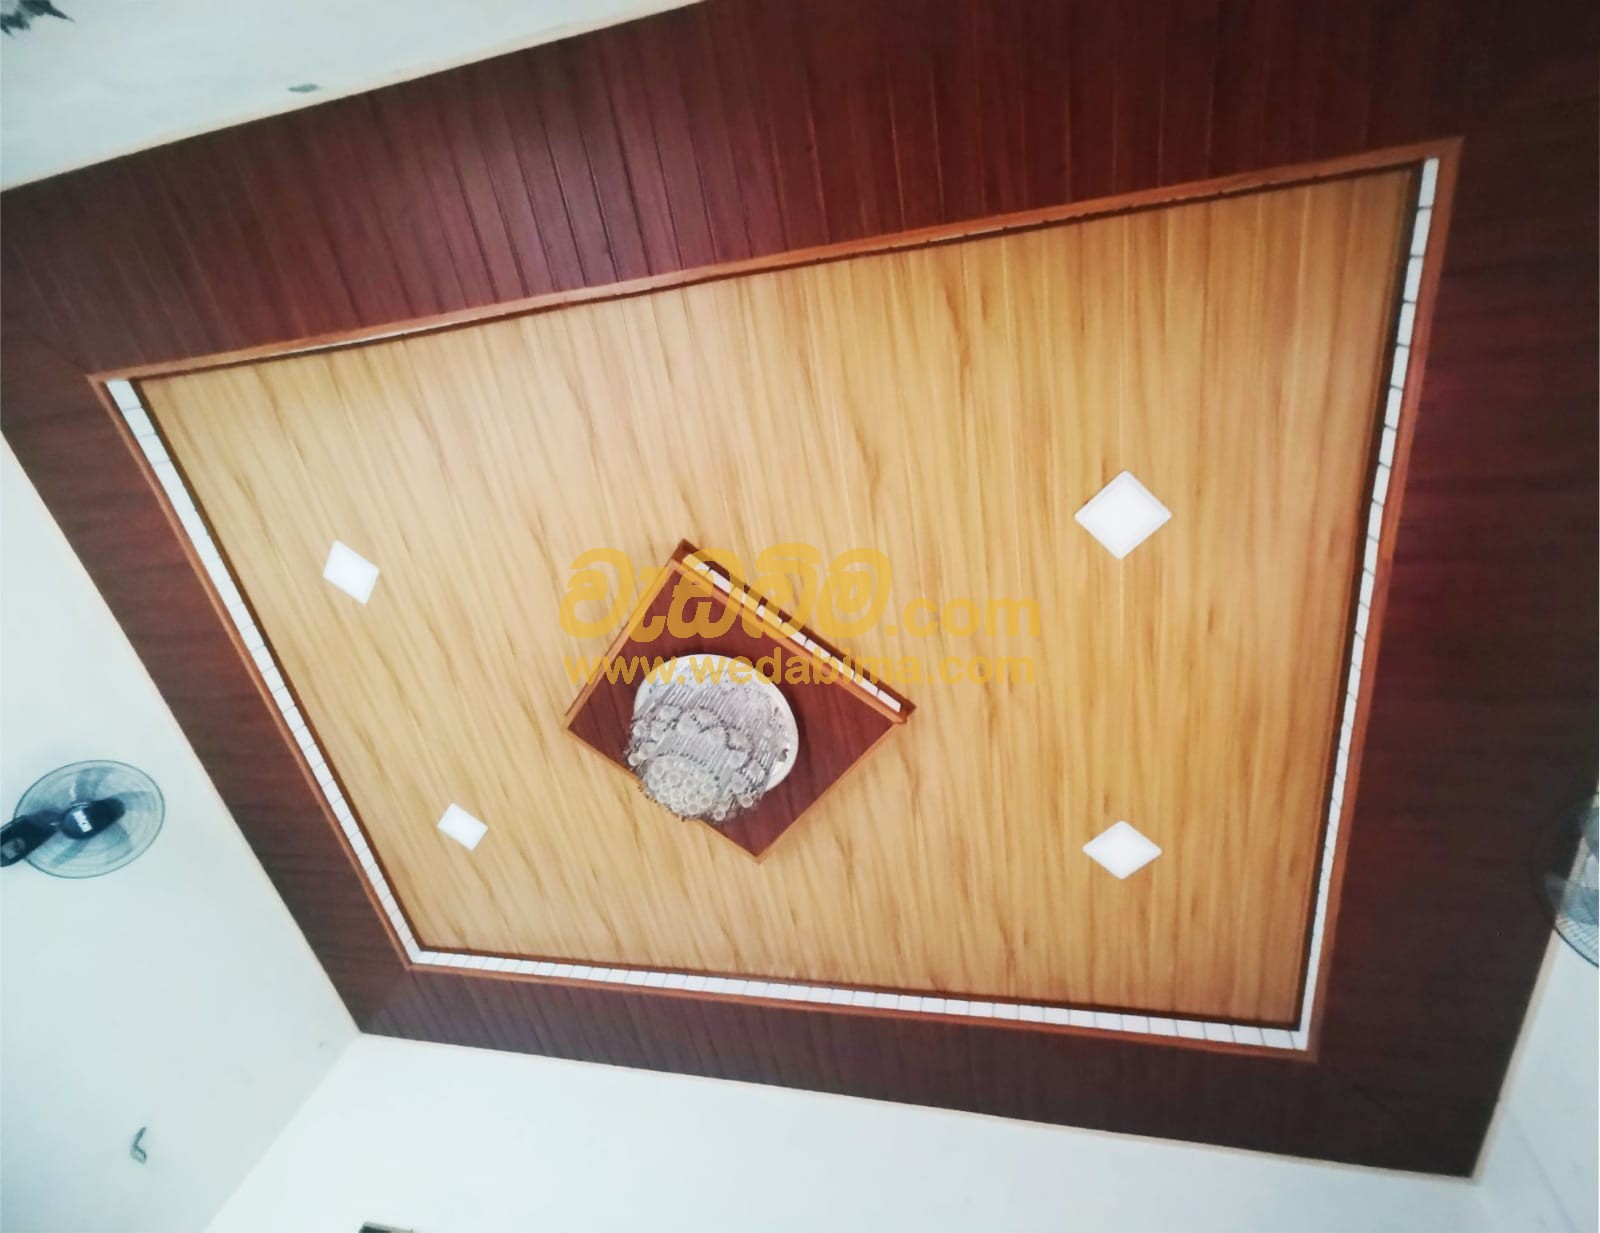 All Ceiling Work - Ampara